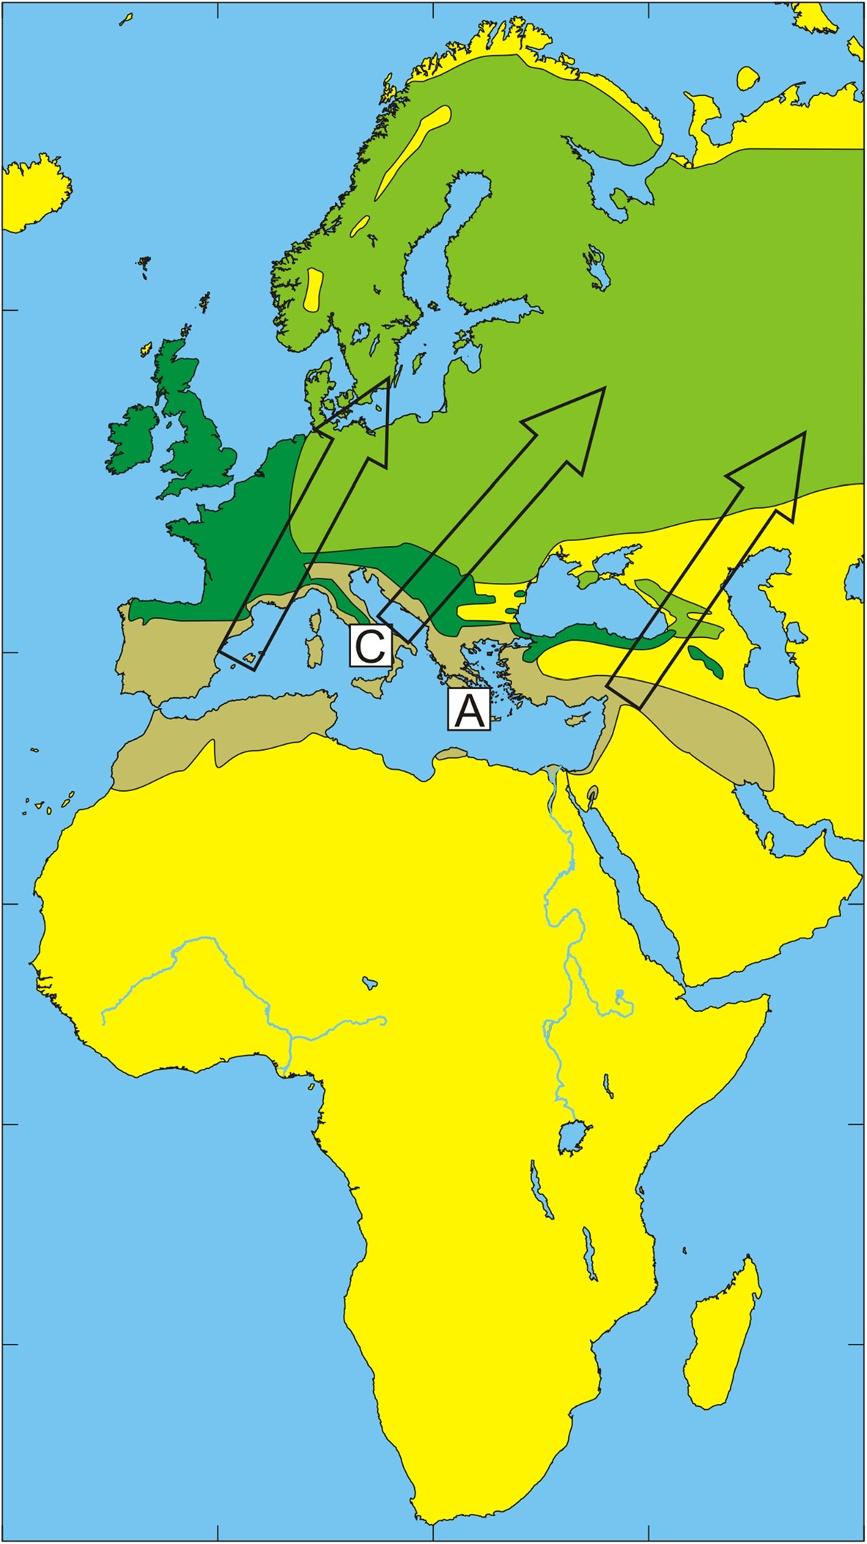 Wallménius et al. Parasites & Vectors 2014, 7:318 Page 13 of 20 Figure 2 Illustration of the wintering and breeding areas and migration directions of five bird species.